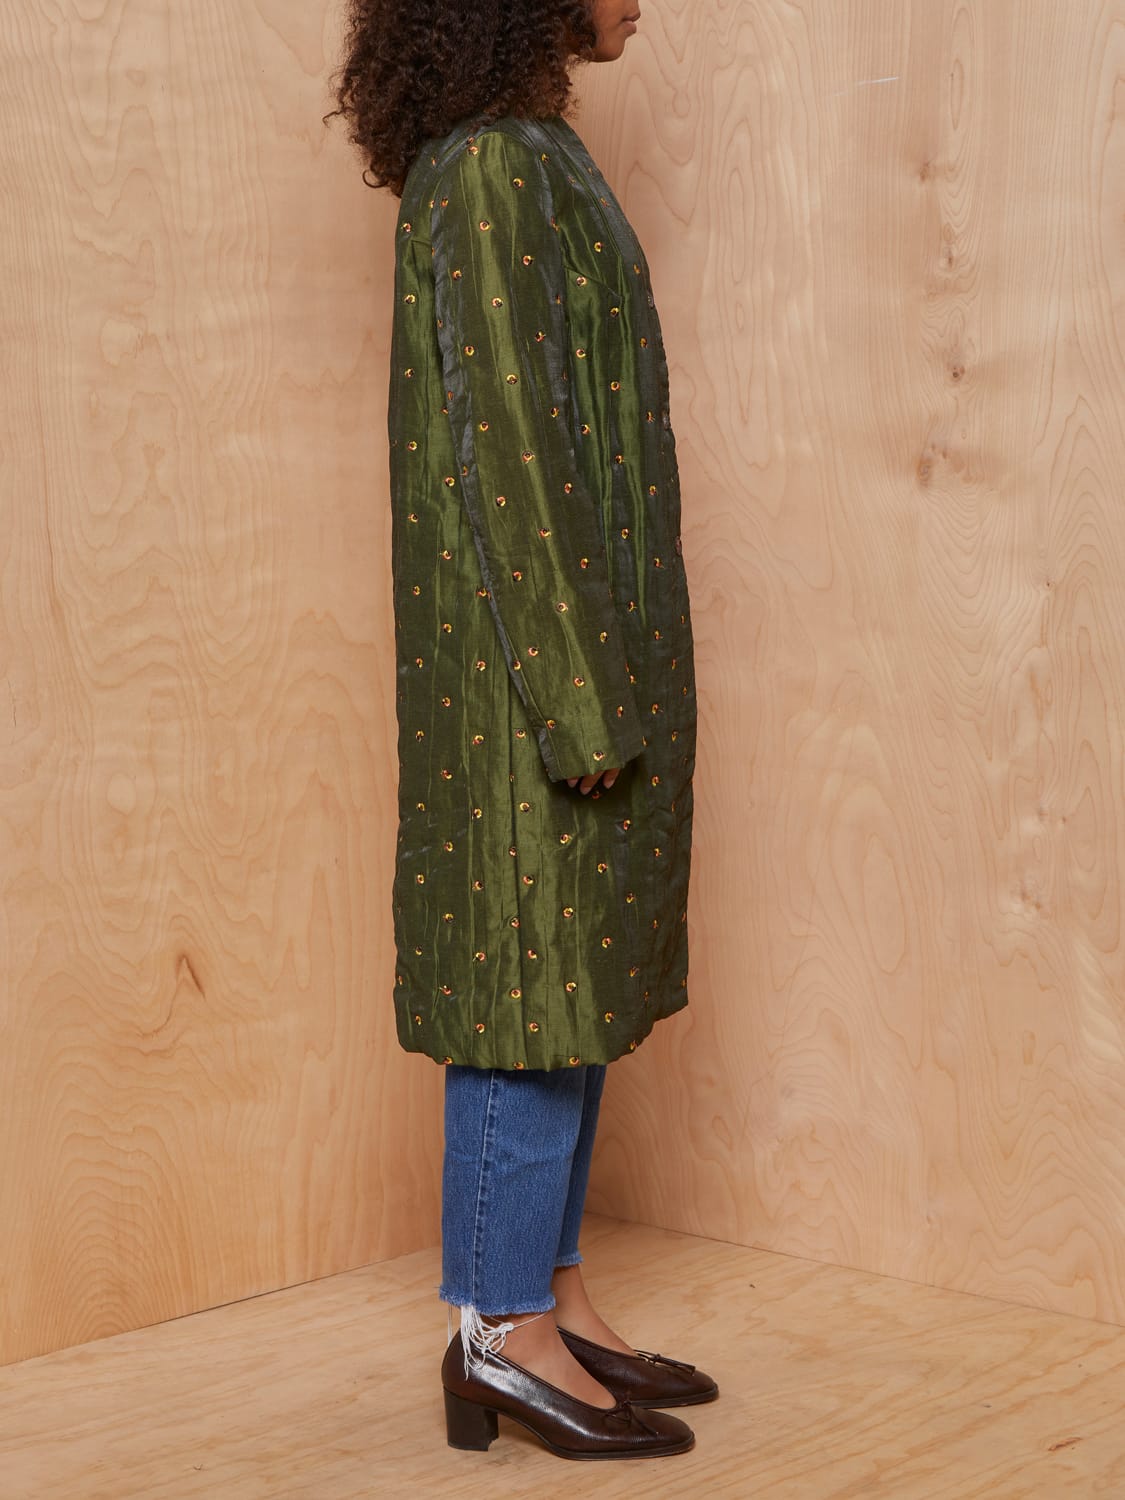 Vintage Irridescent Green Coat with Autumnal Embroidery